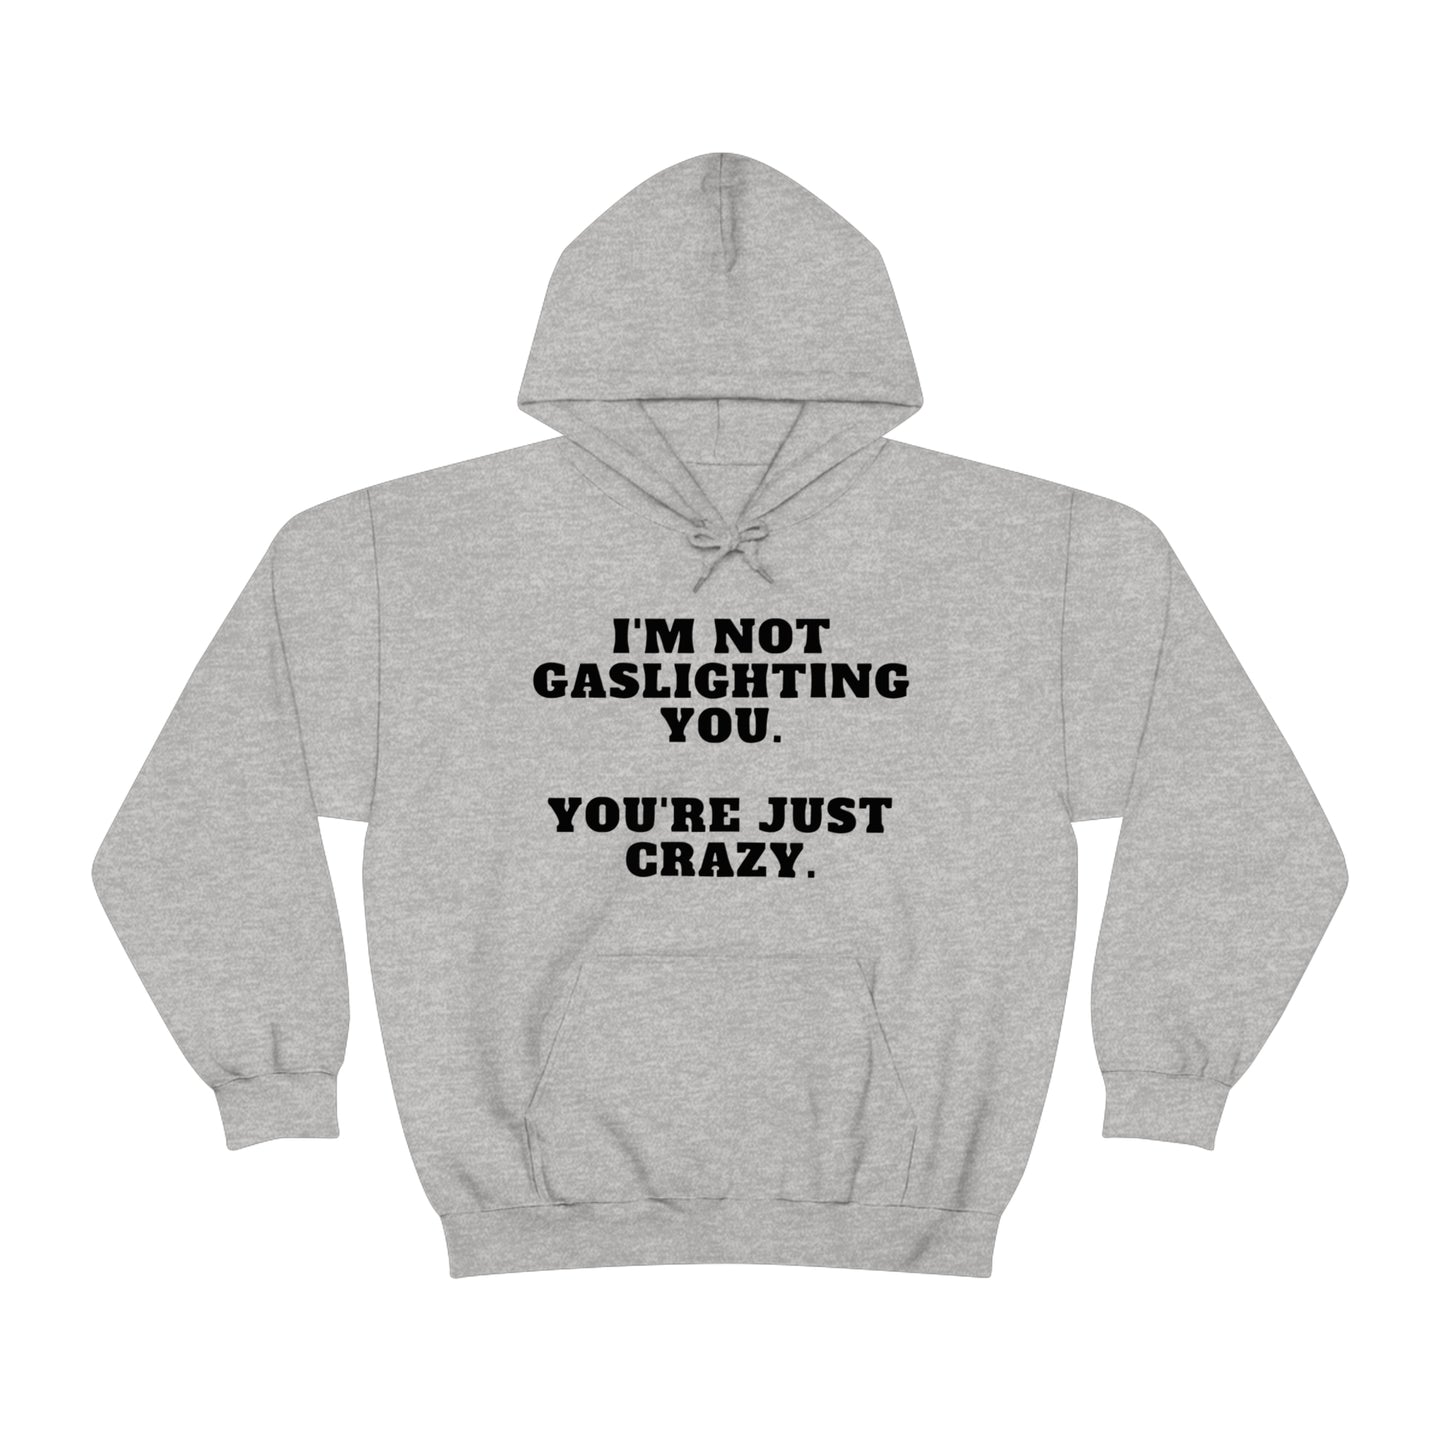 "I'm Not Gaslighting You. You're Just Crazy." Hoodie